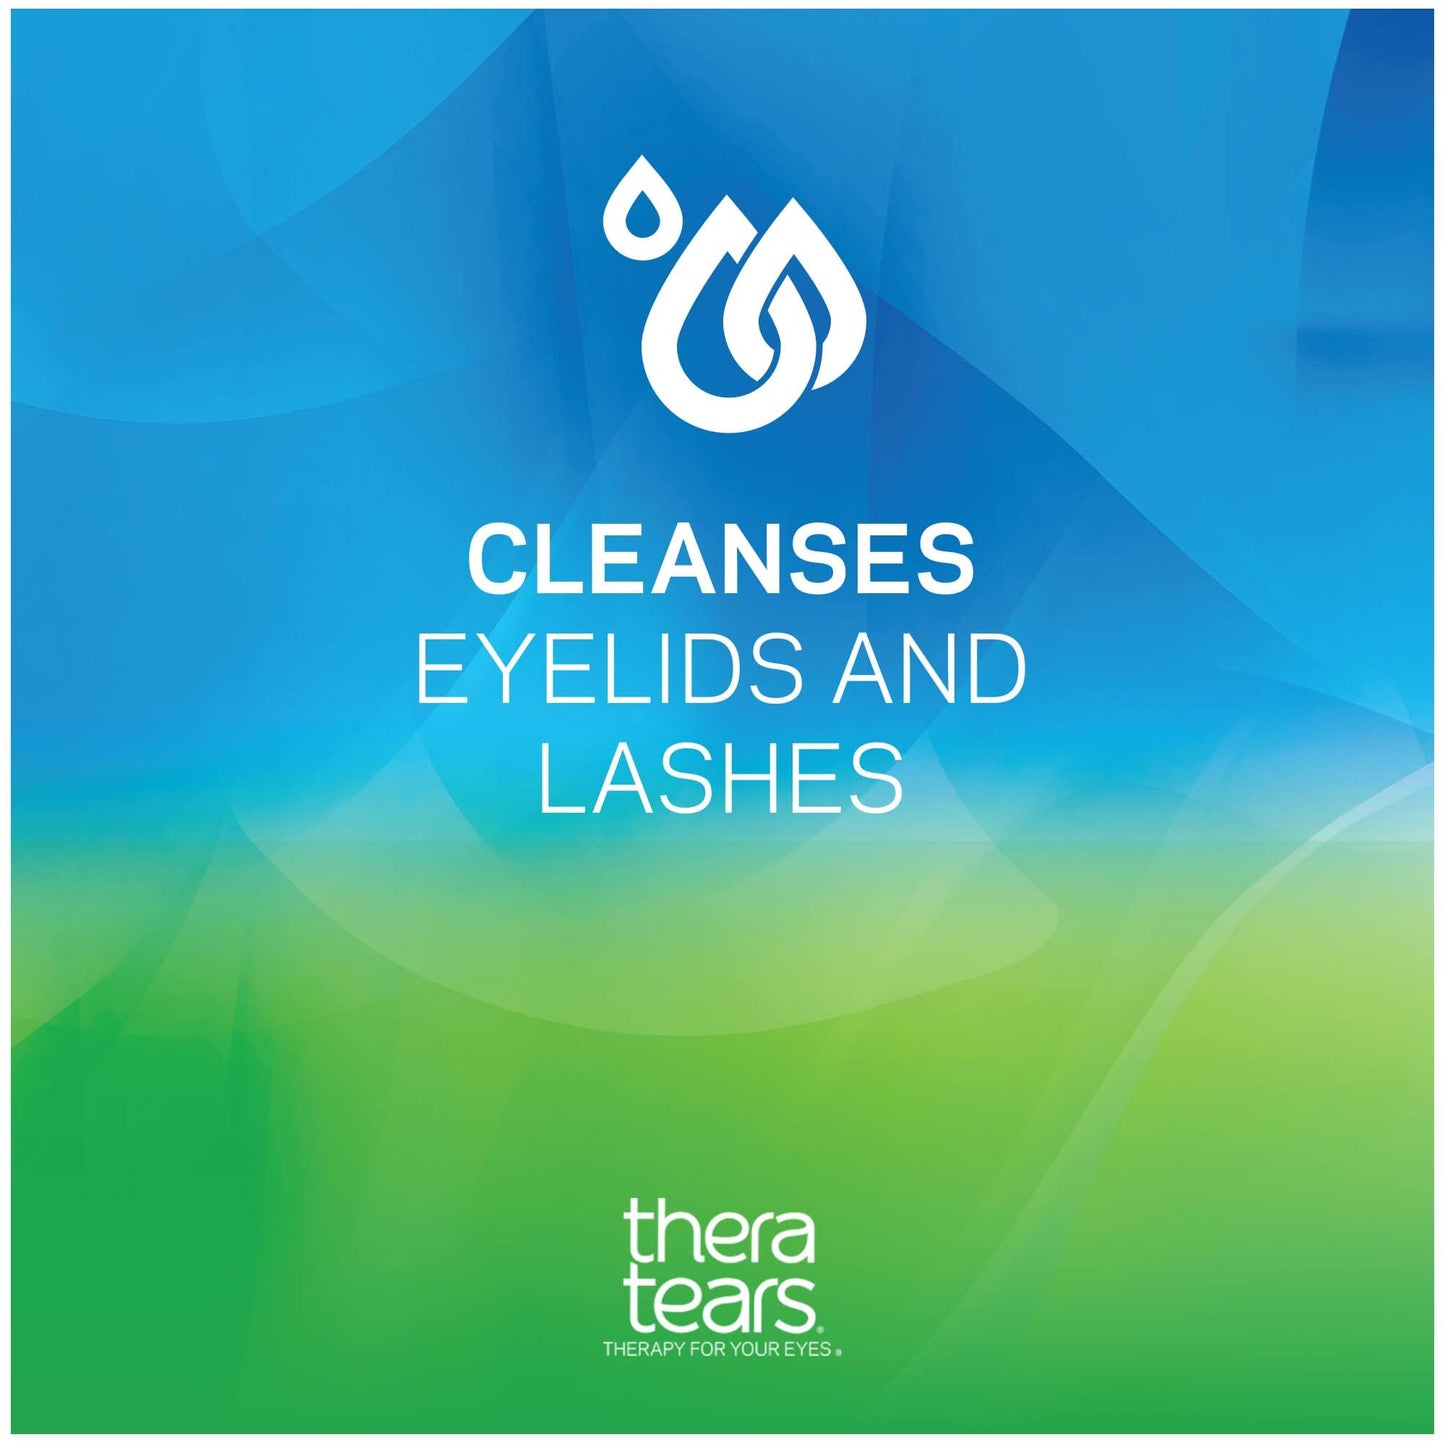 TheraTears SteriLid Eyelid Cleanser and Face Wash, for irritated eyes, 2 fl oz Spray